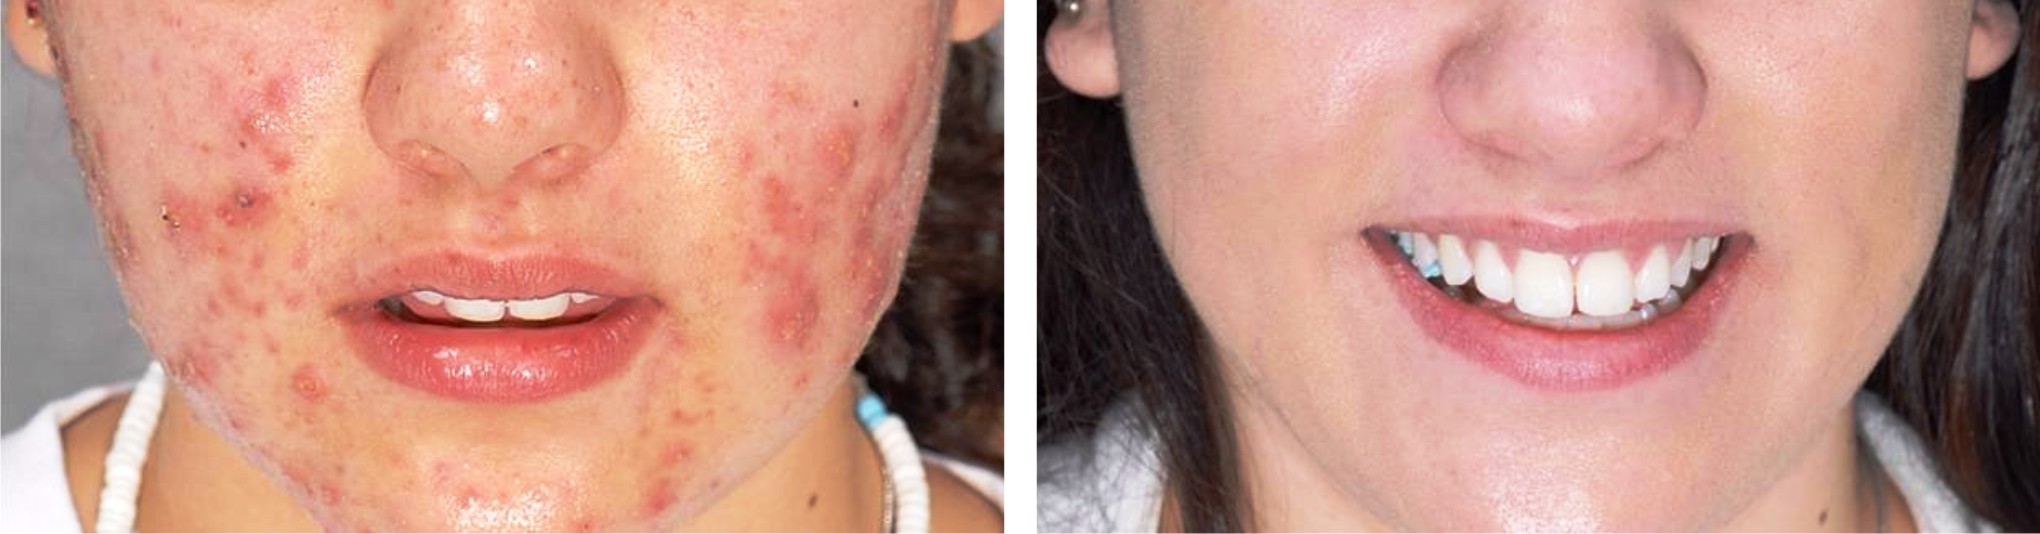 Laser Acne Scar Removal Image One